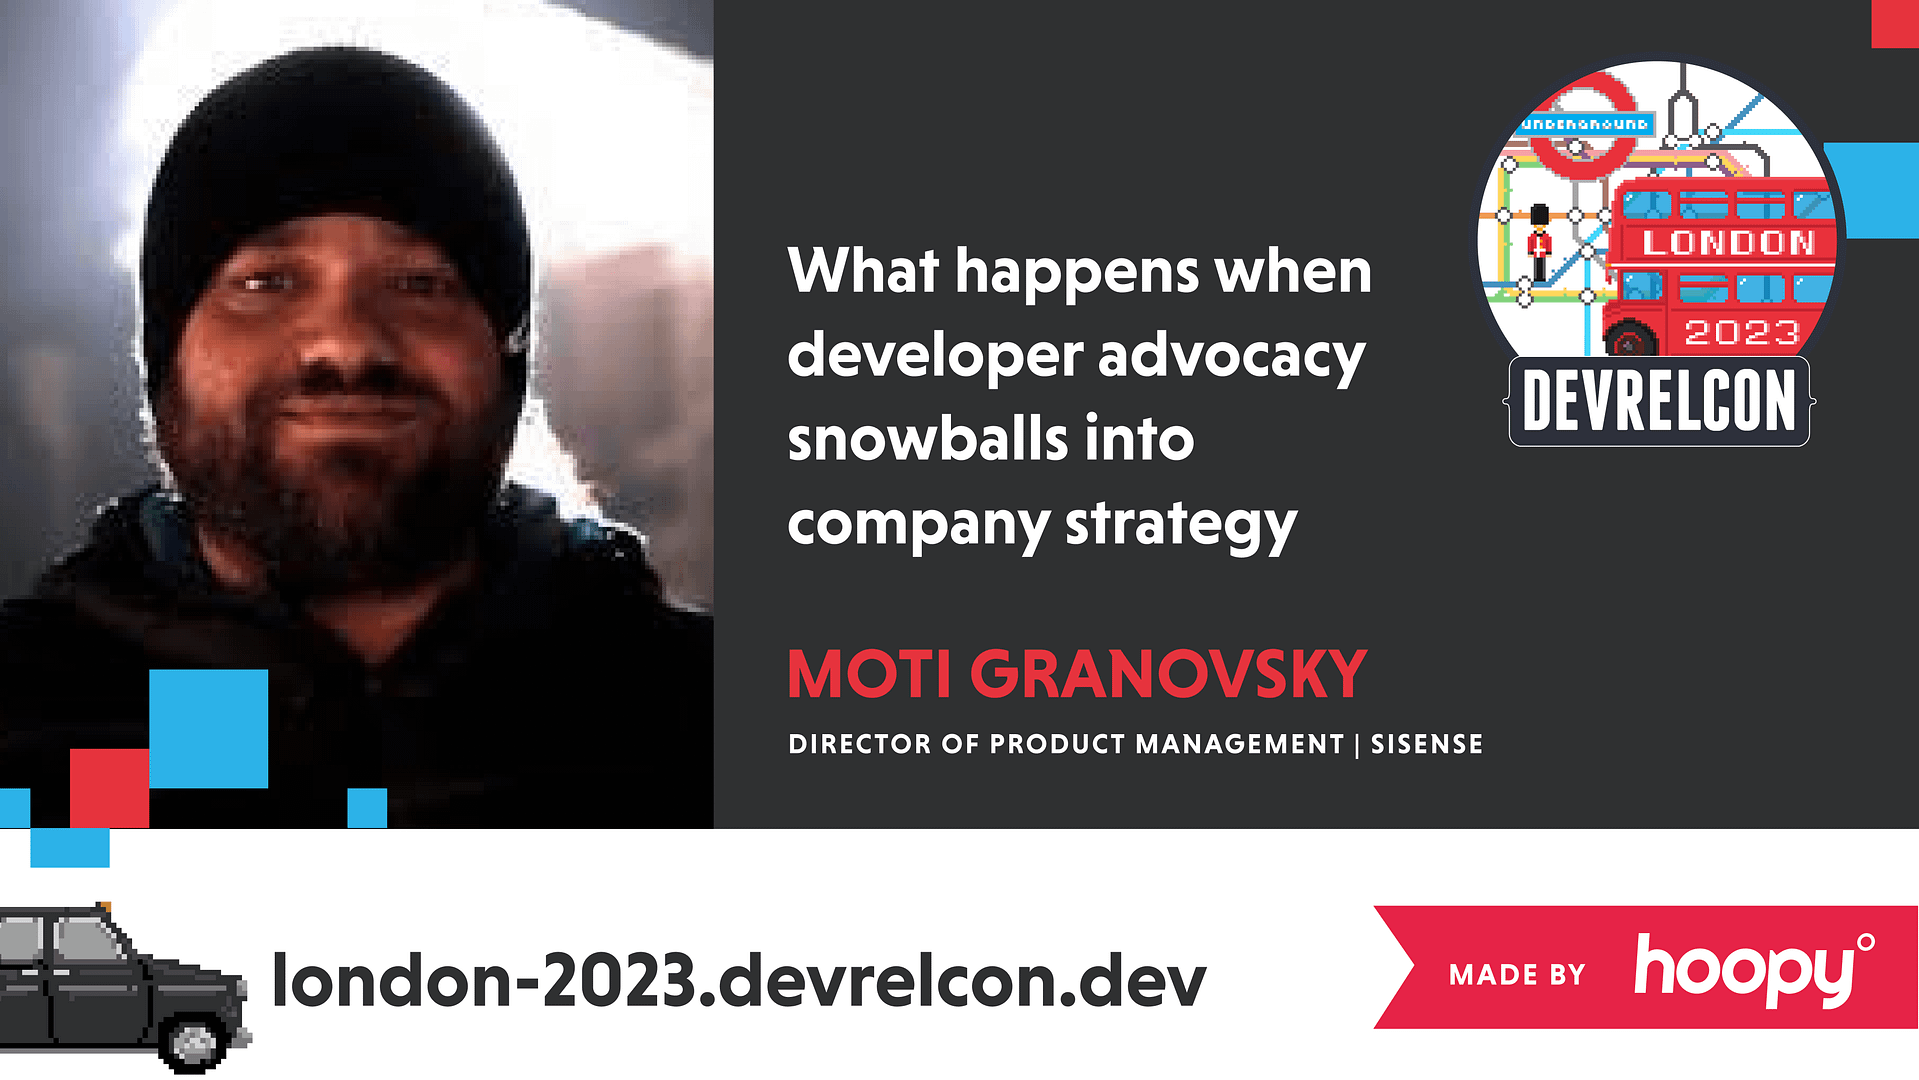 The image is a promotional graphic for a presentation by Moti Granovsky at DevRelCon London 2023. The graphic shows a photo of Moti Granovsky wearing a beanie hat and a friendly smile. The text next to him states, "What happens when developer advocacy snowballs into company strategy," suggesting the topic of his talk will explore the influence of developer relations on broader company objectives. Moti Granovsky is identified as the Director of Product Management at Sisense. The graphic includes the DevRelCon logo with iconic London imagery, such as the underground sign and a double-decker bus, with the year 2023. The URL "london-2023.devrelcon.dev" is featured at the bottom, along with the Hoopy logo, indicating that the graphic is created by or associated with Hoopy. The design conveys a professional tone befitting a corporate conference.